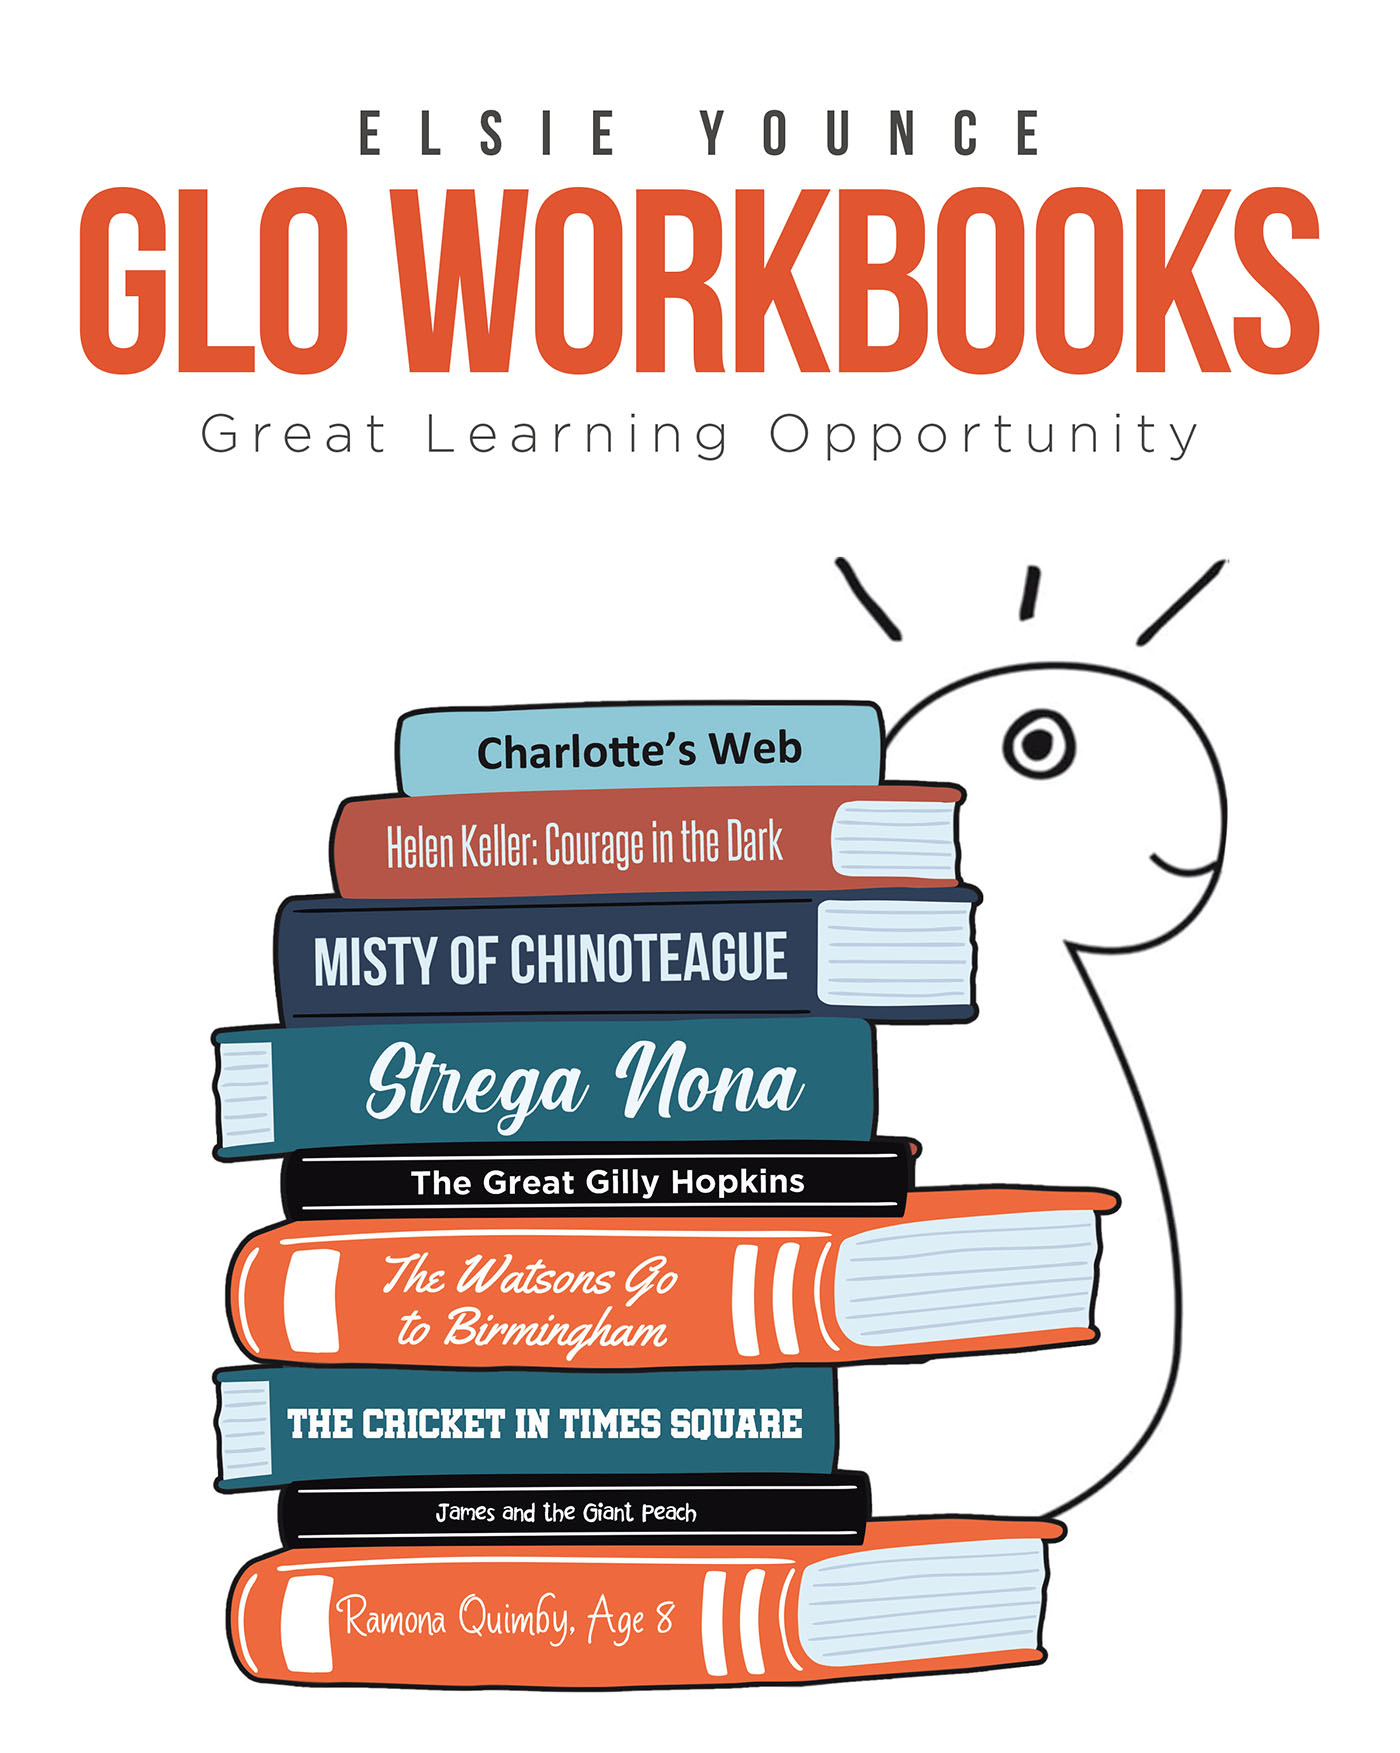 Author Elsie Younce’s New Book, “GLO Workbooks: Great Learning Opportunity,” is a Guided Activity Book for Young Readers to Engage with Classic Children's Literature